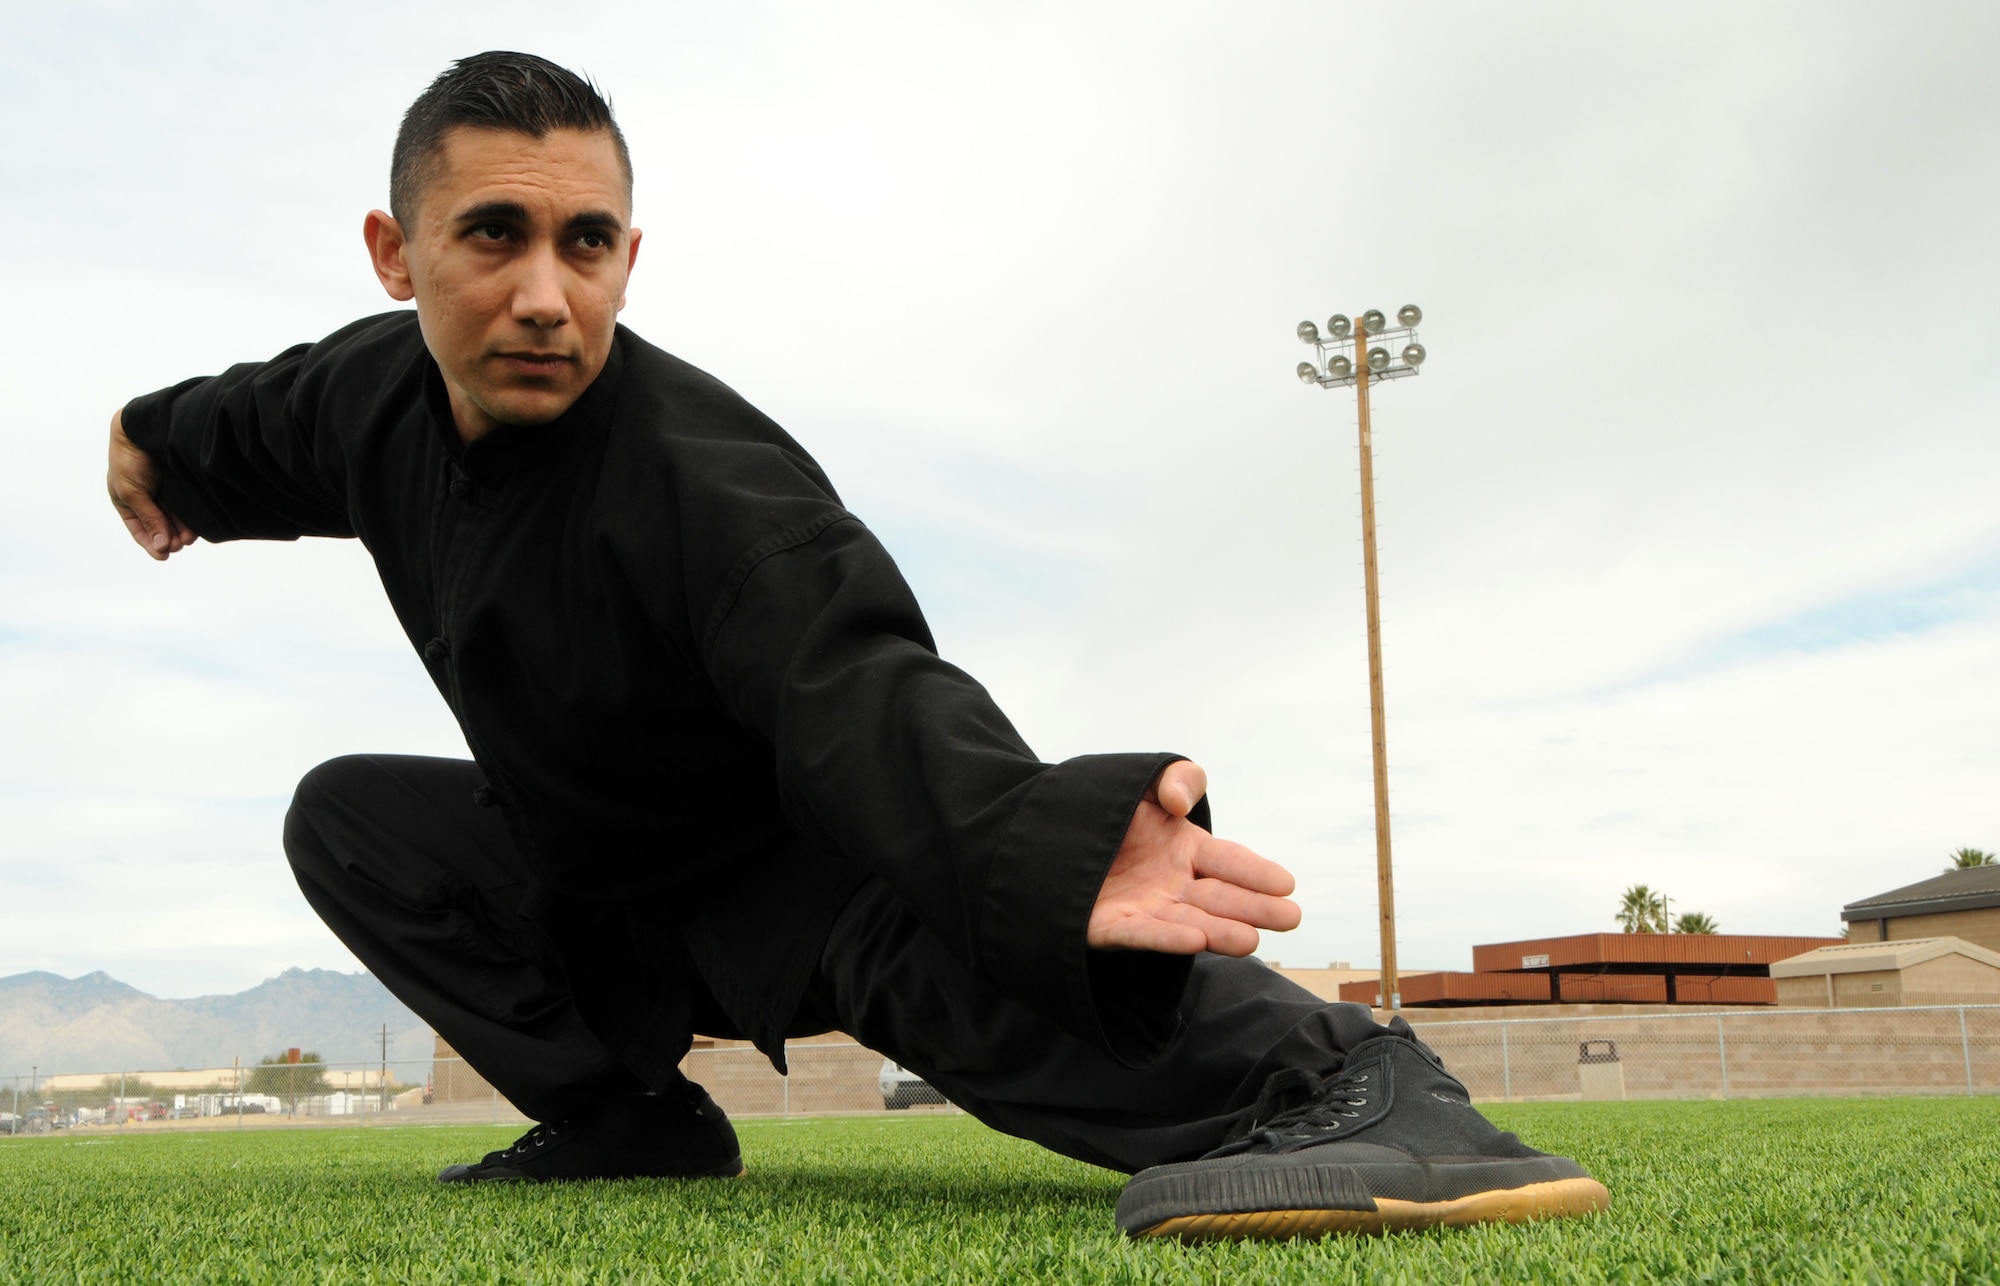 Senior Airman Michael Bonit, 47th Fighter Squadron aircrew flight equipment technician, practices his martial art at Davis-Monthan Air Force Base, Ariz, February 12, 2017. Bonit’s favorite type of martial arts is Jeet Kune Do created by Bruce Lee. (U.S. Air Force photo by Tech. Sgt. Courtney Richardson)